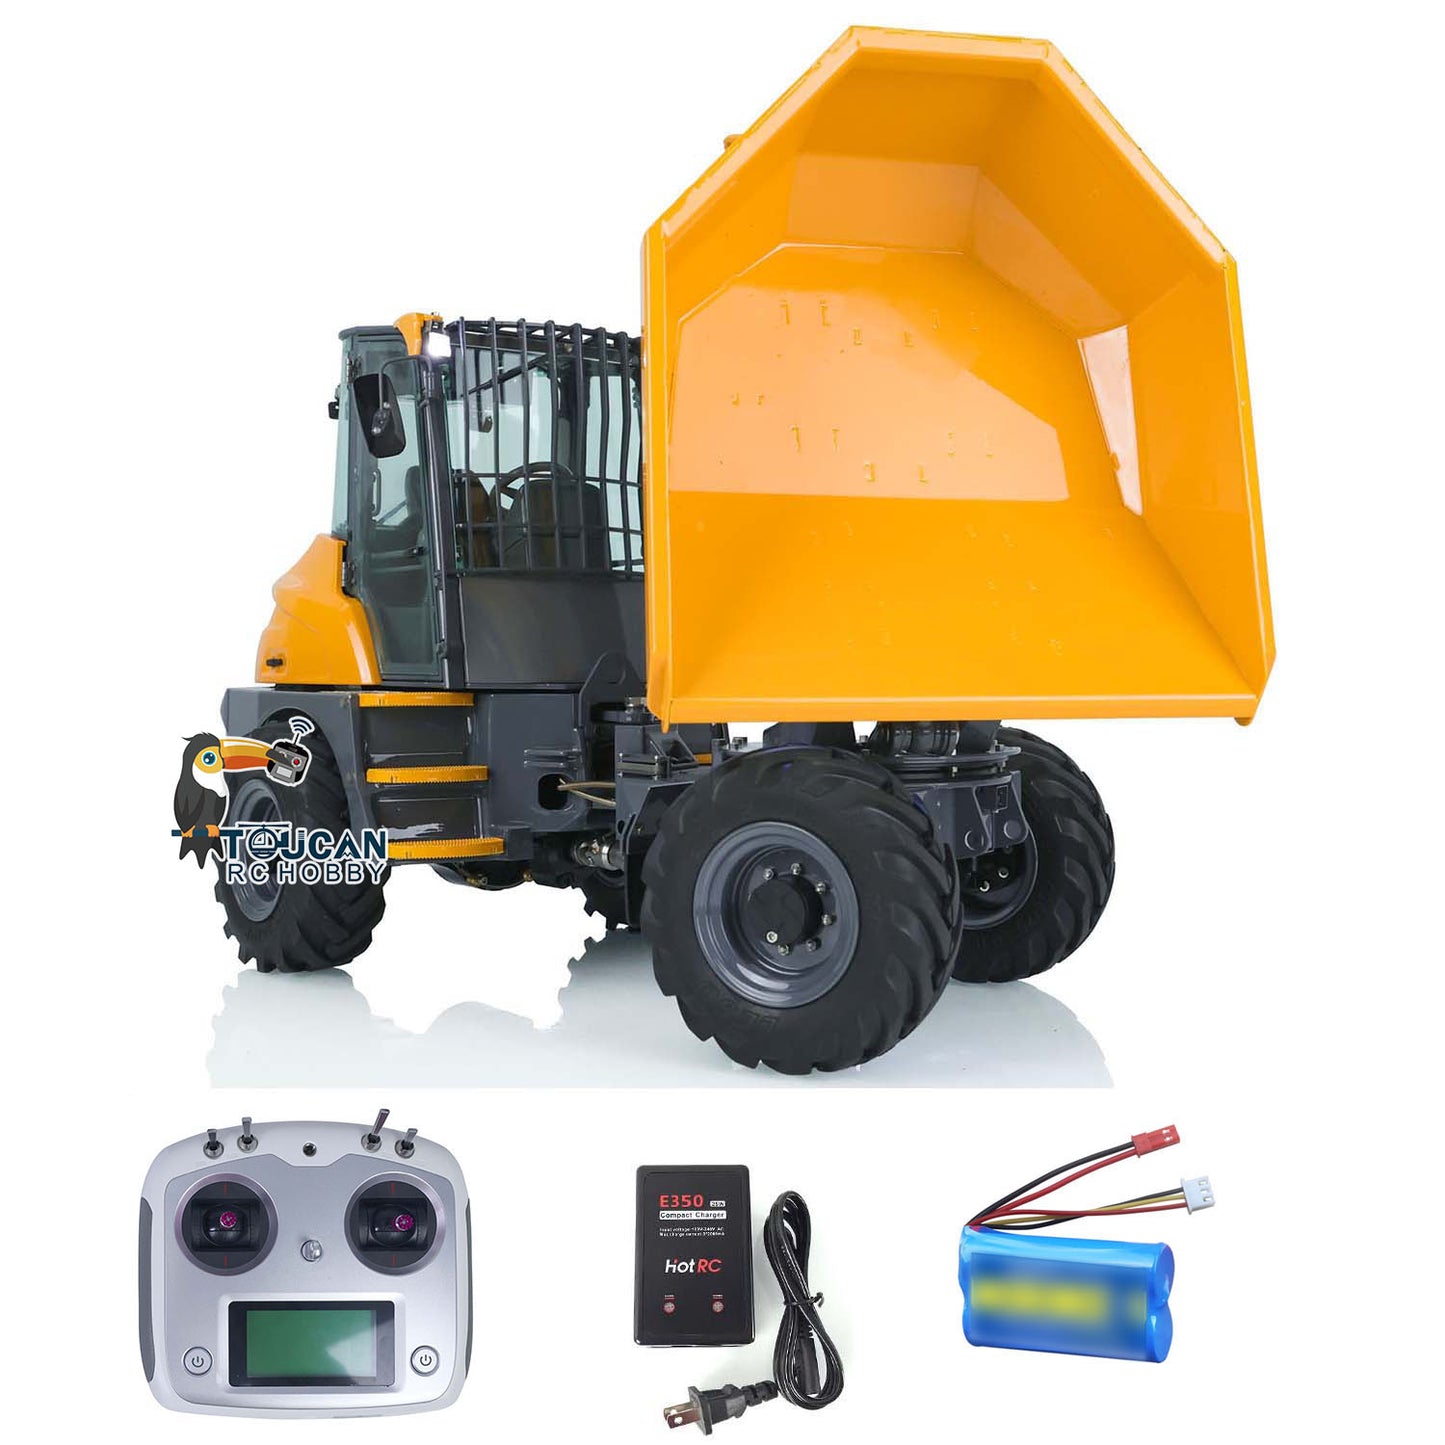 LESU 1/14 Metal Painted RC Remote Controlled Hydraulic Articulated Dumpers AOUE 6MDX Ready To Run Motor ESC Light System